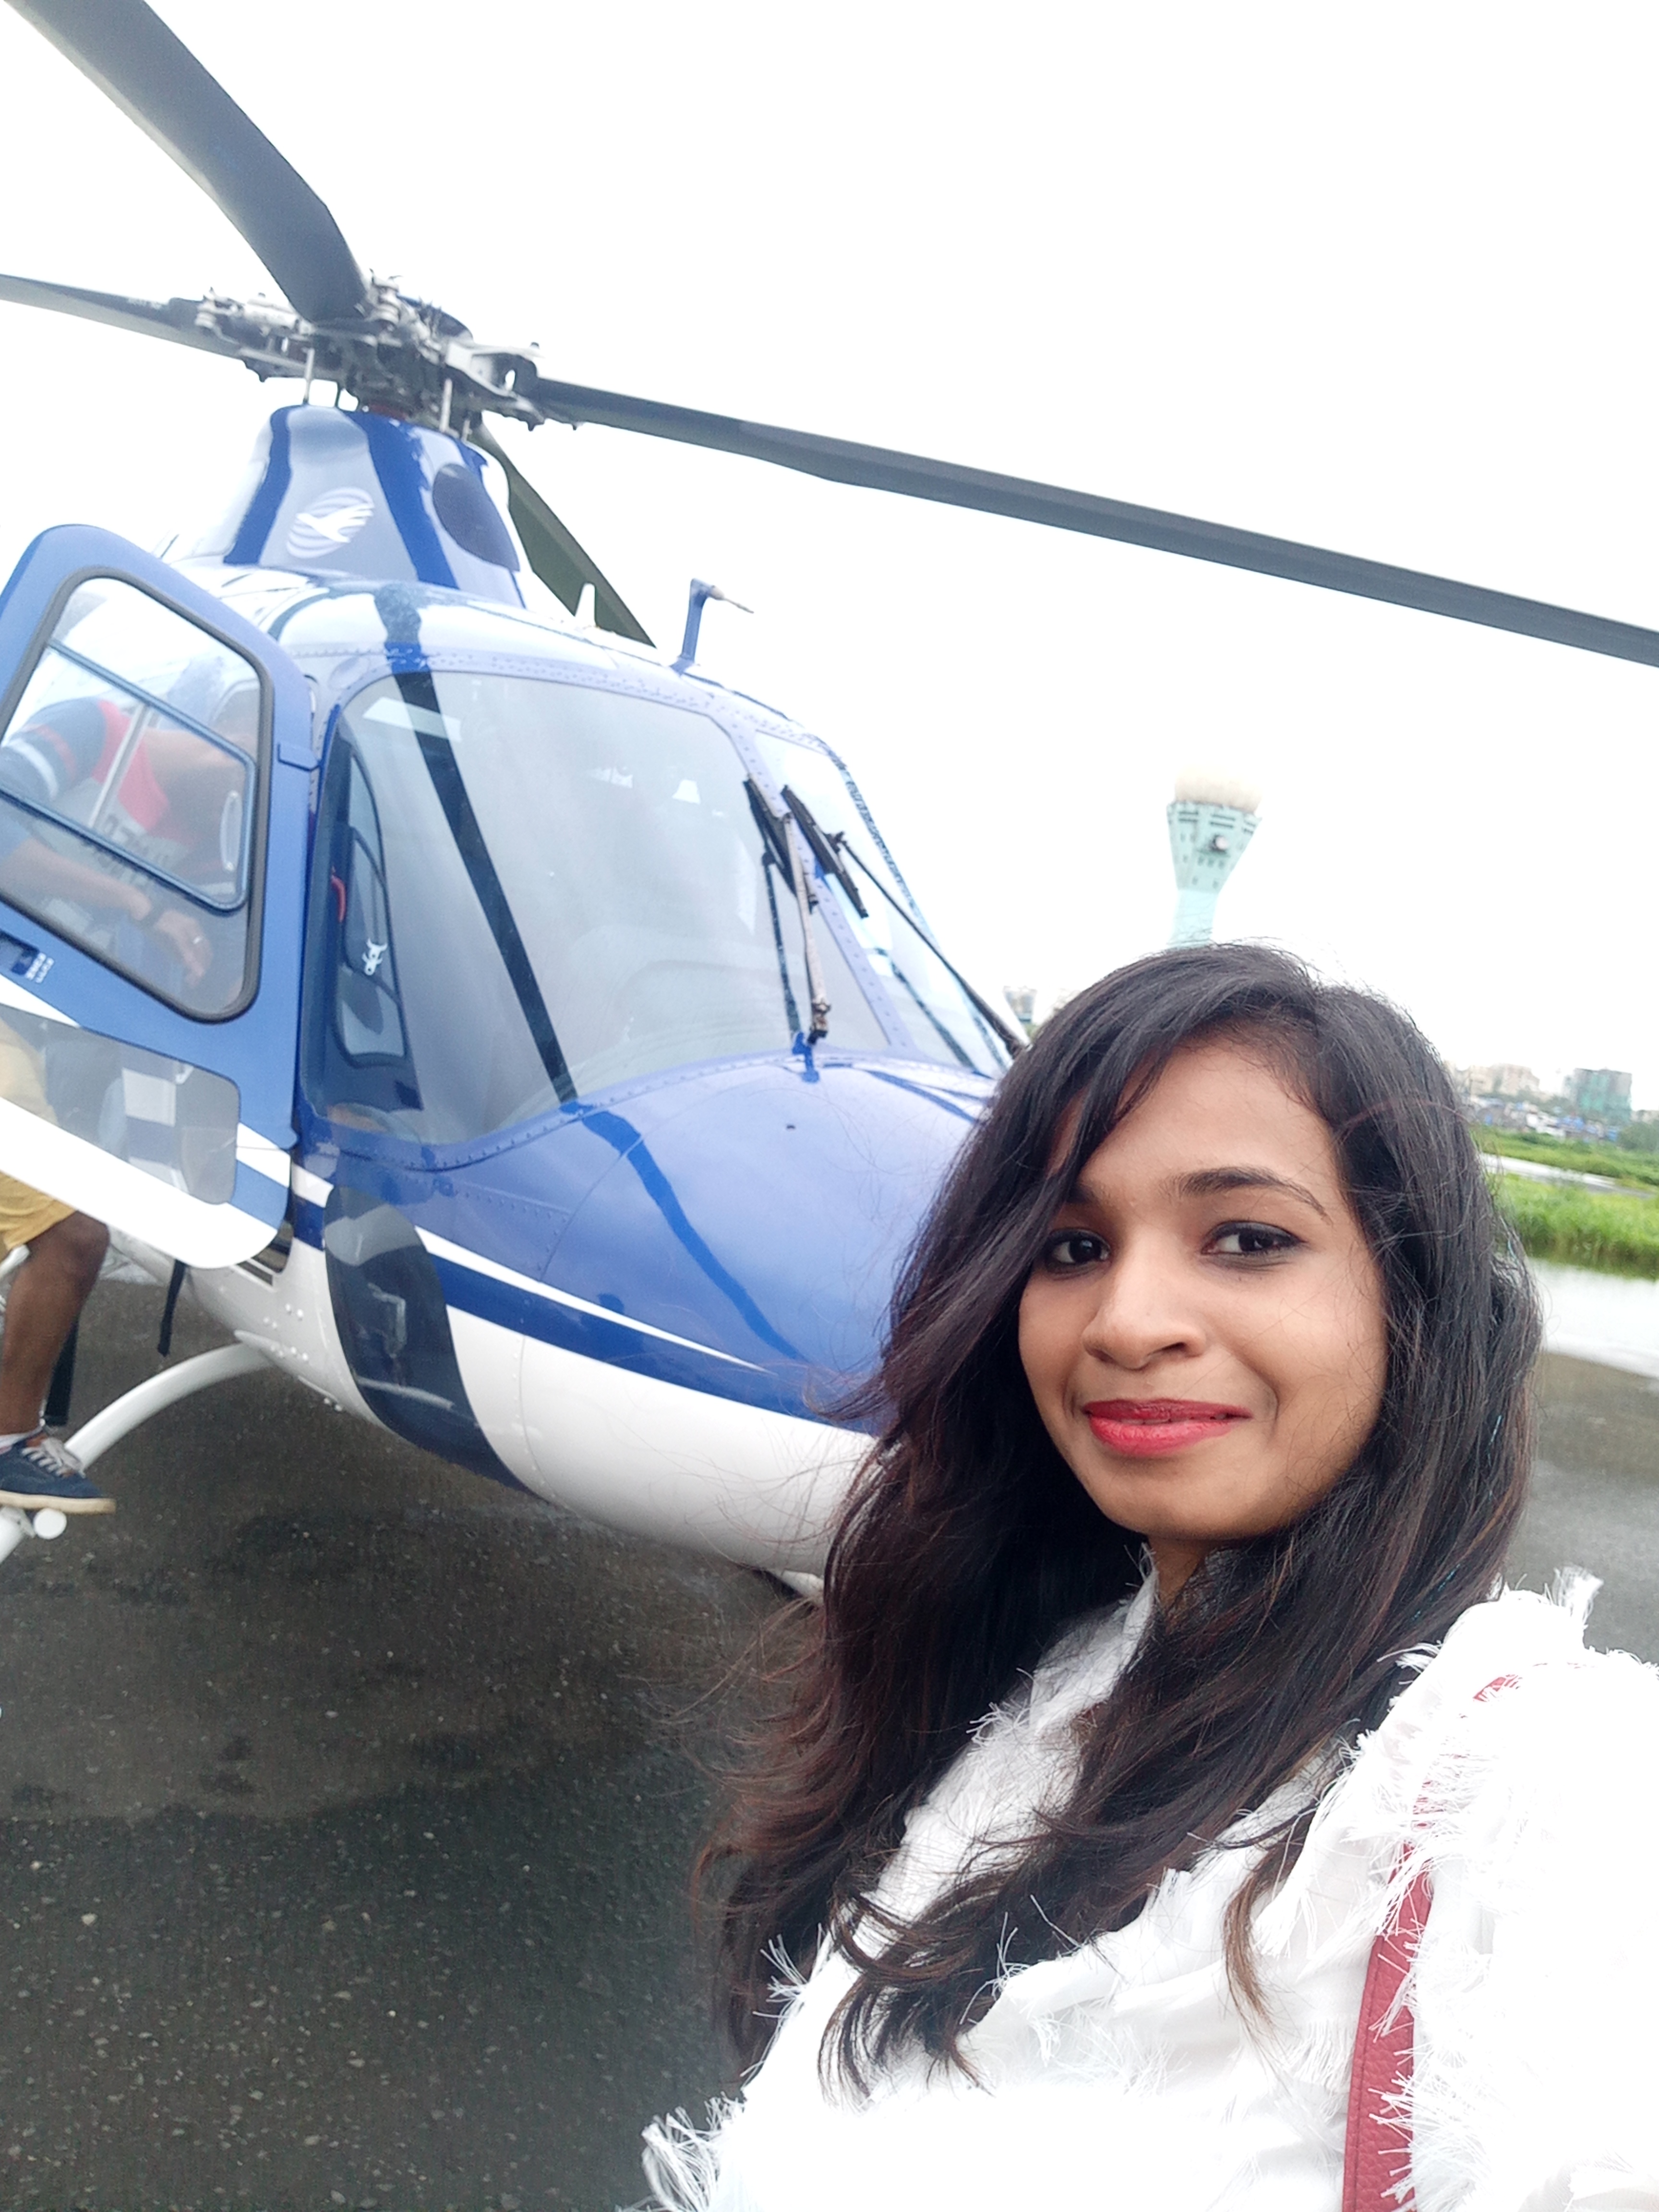 Helicopter ride by Hindustan times 